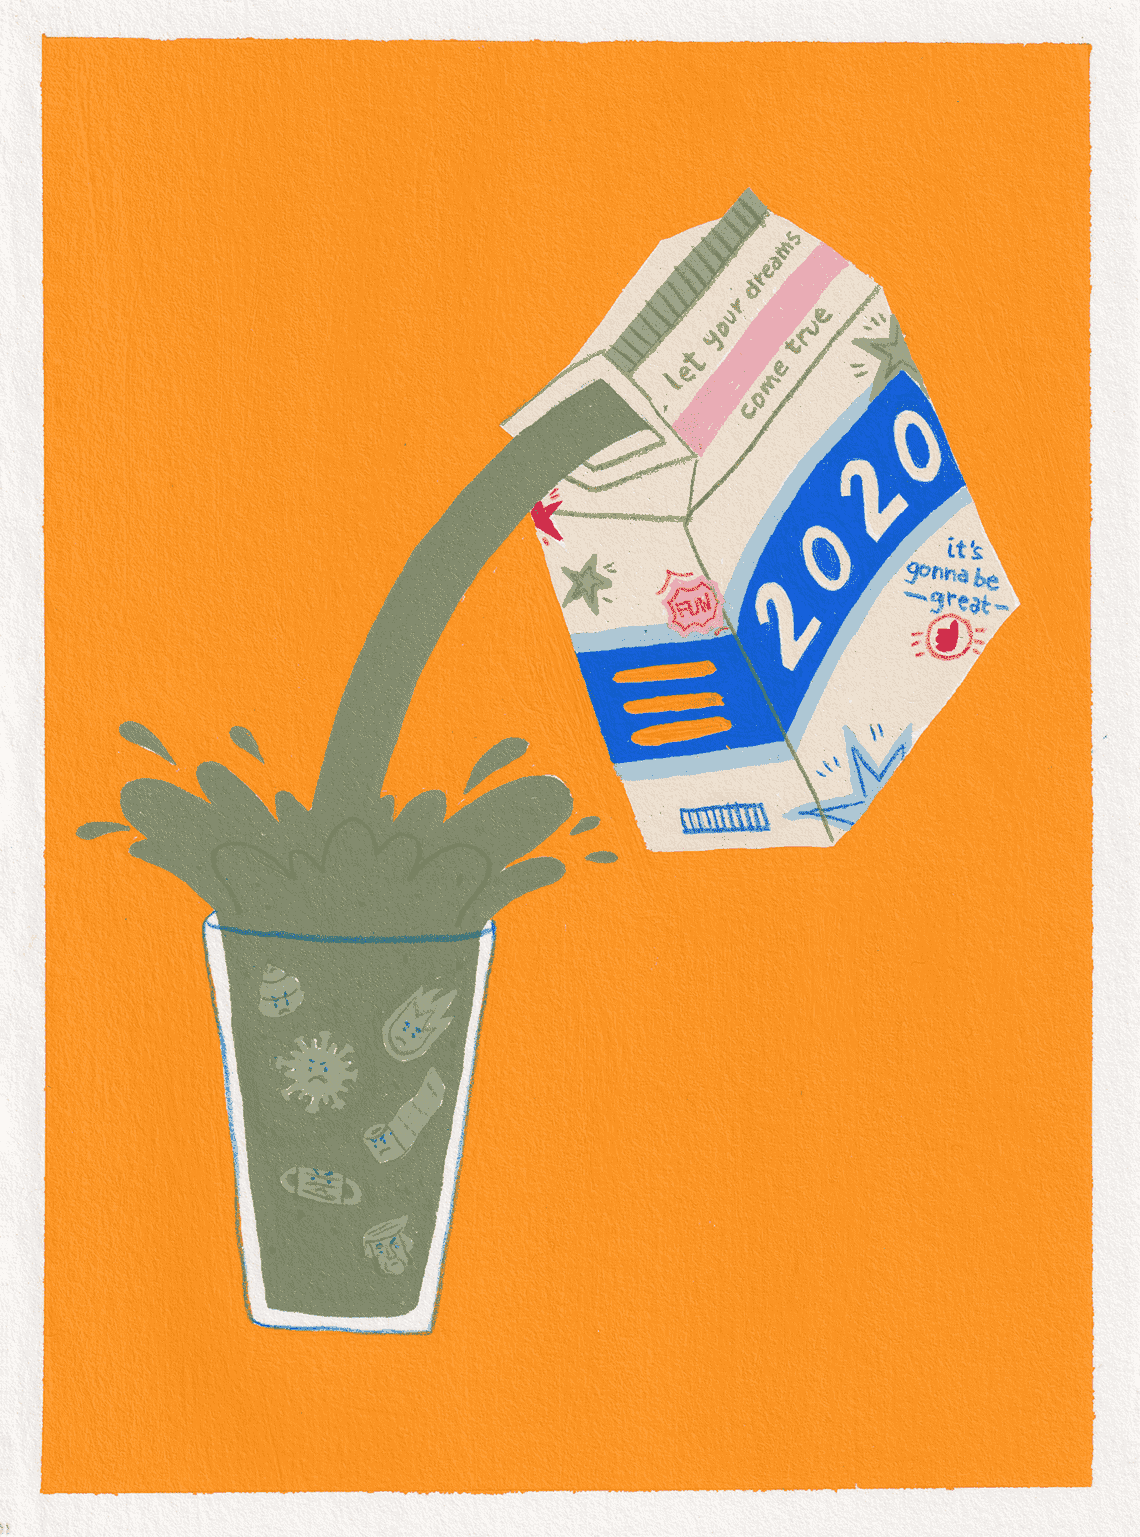 Gouache illustration of a 2020 carton spilling some nasty looking liquid into glass.